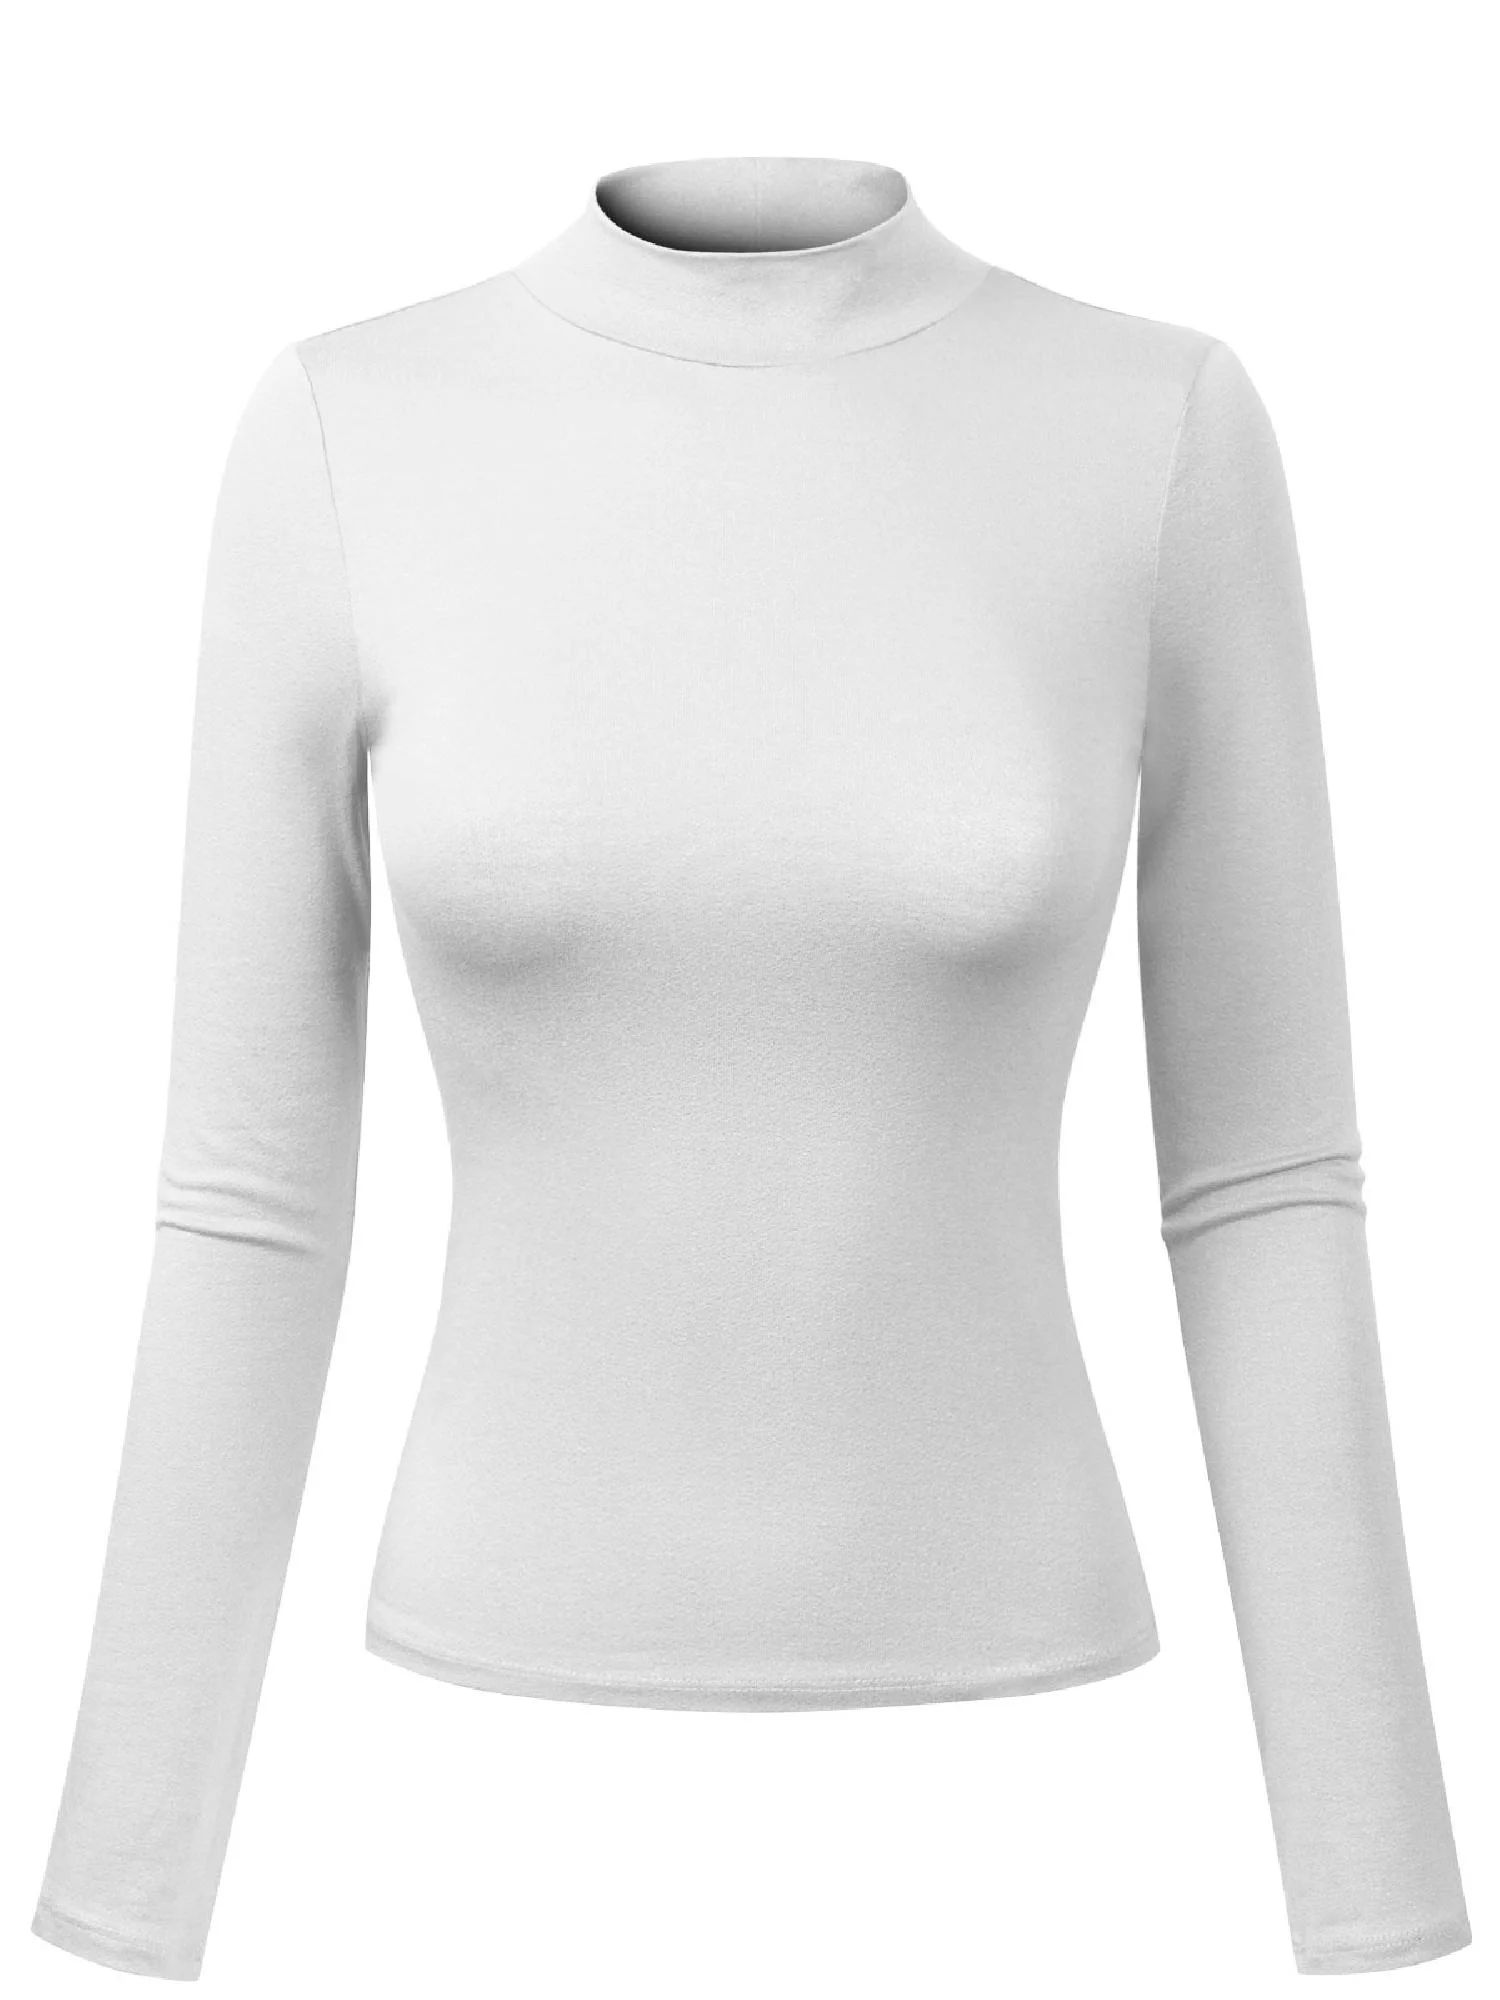 Made by Olivia Women's Solid Tight Fit Lightweight Long Sleeves Mock Neck Top | Walmart (US)